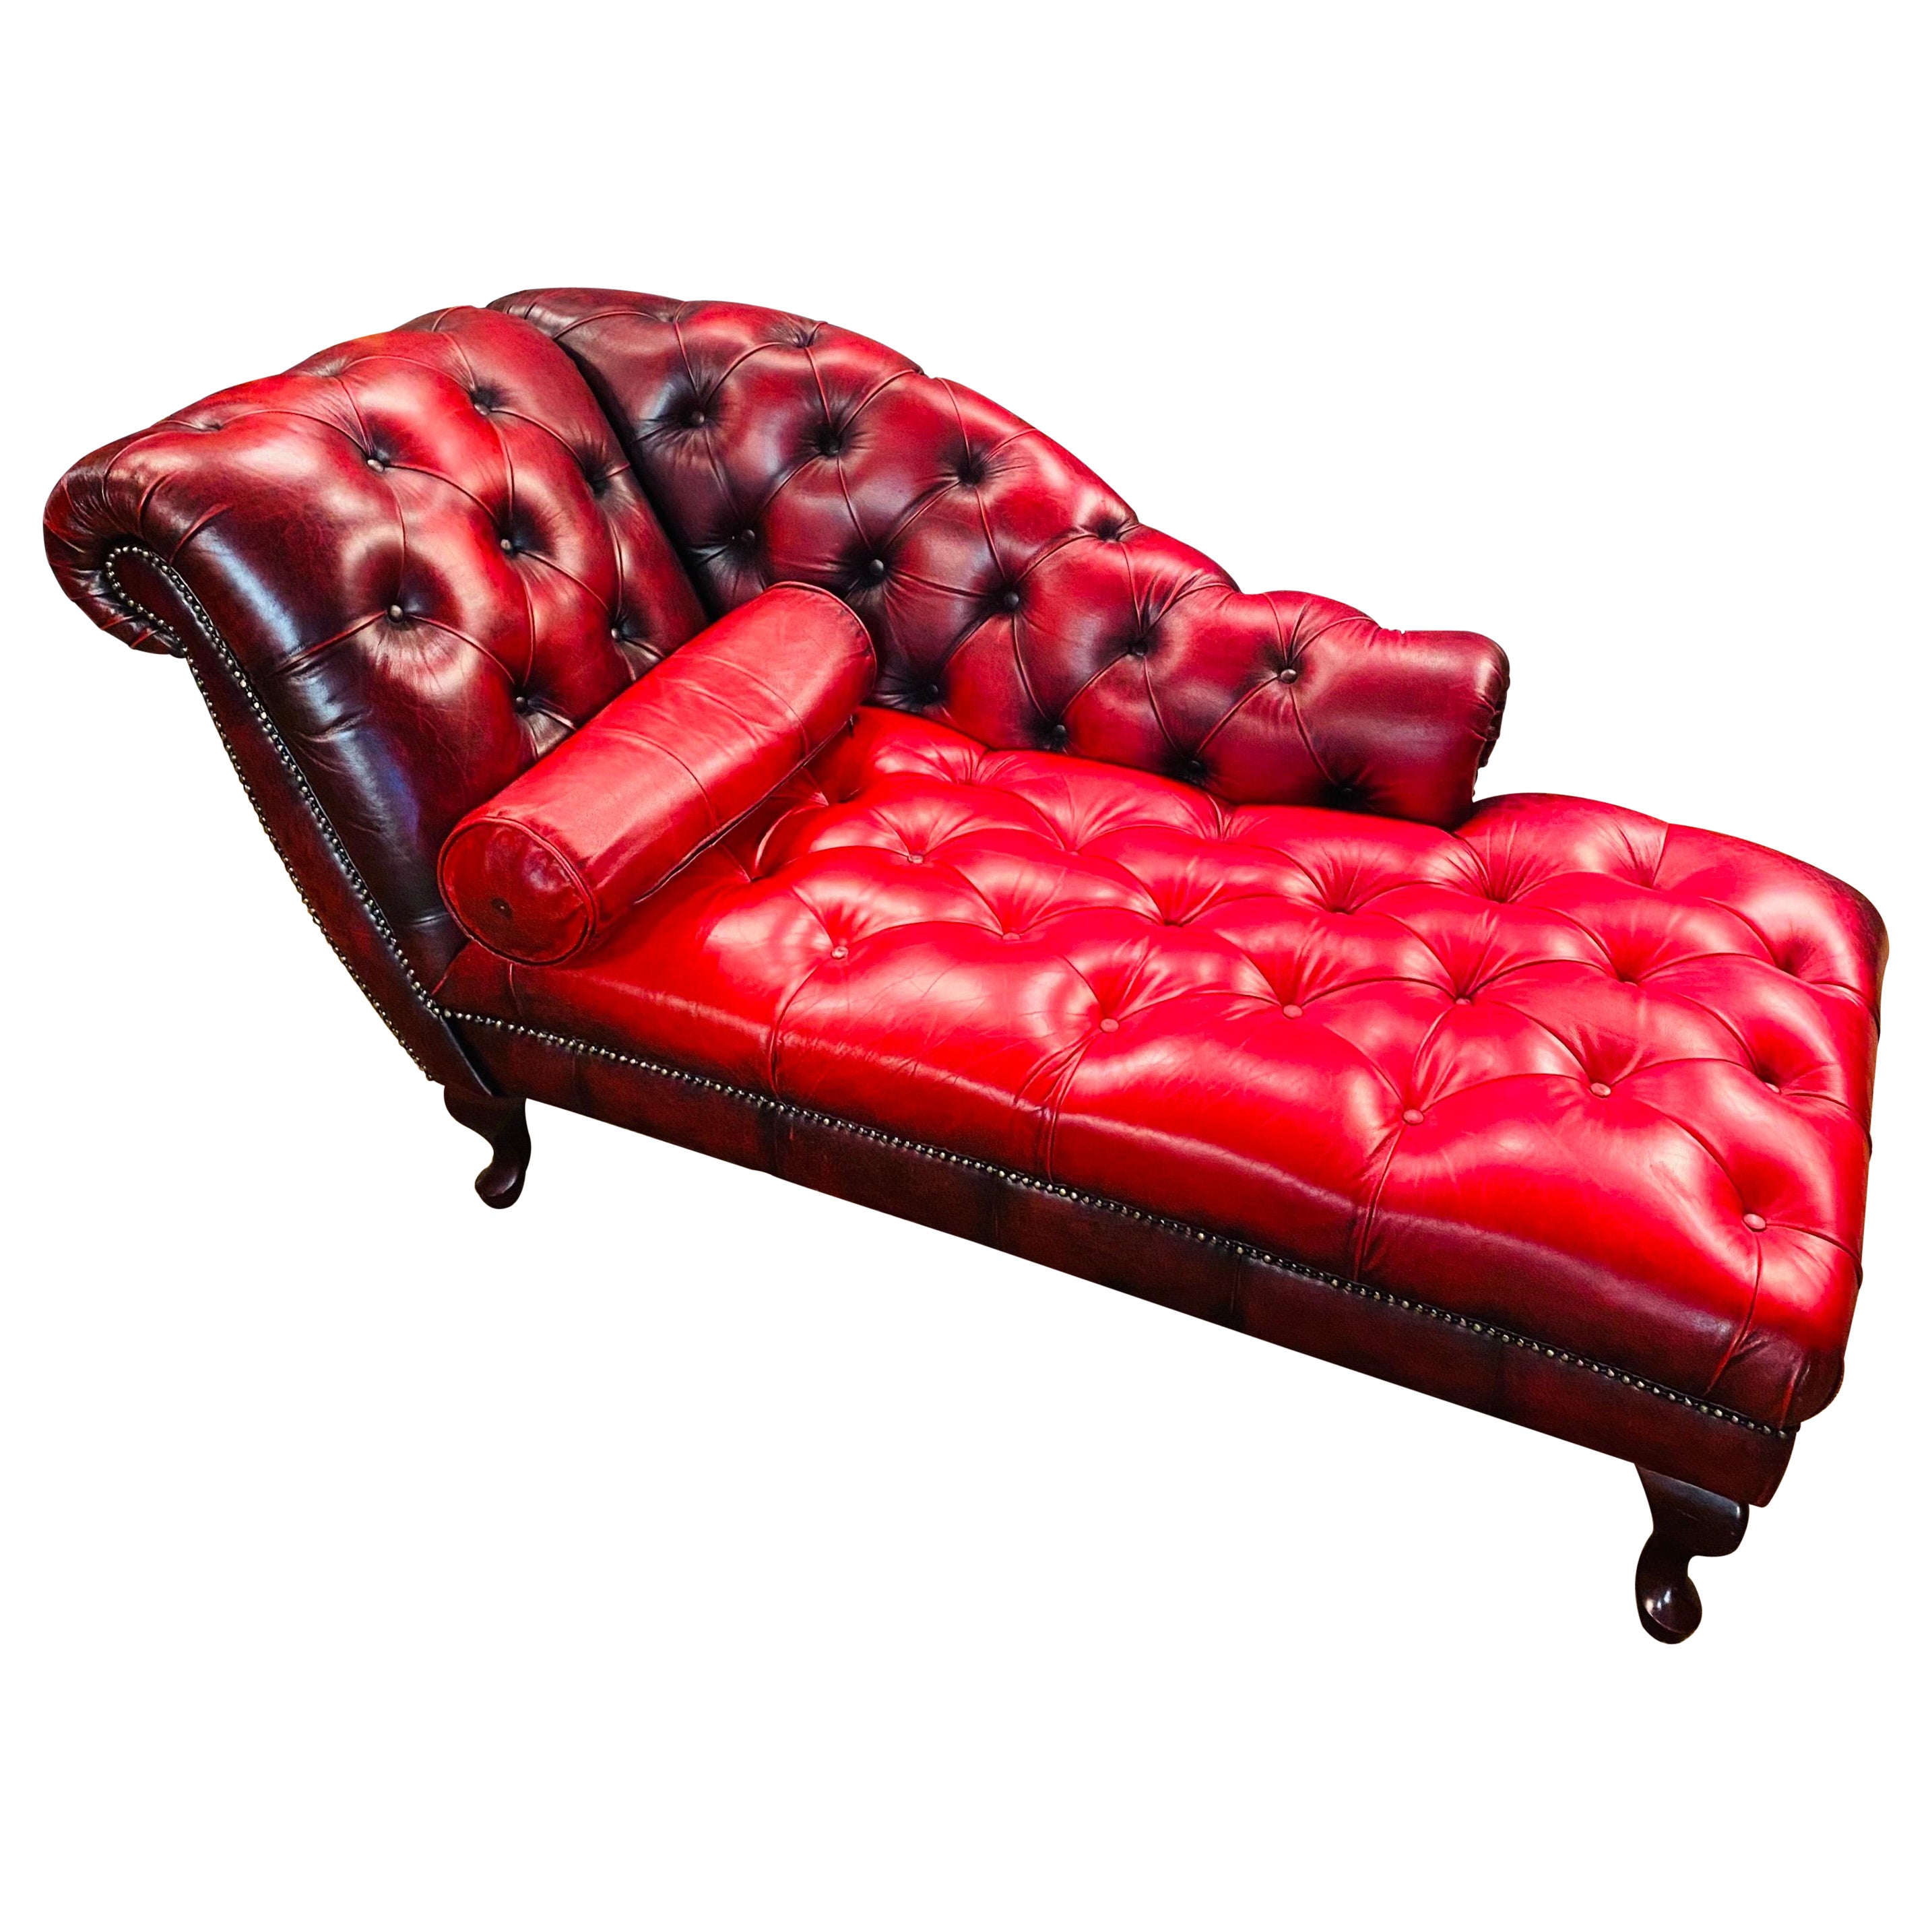 Schönes original vintage Chesterfield Rotes Leder Chaise Lounge Daybed Sofa